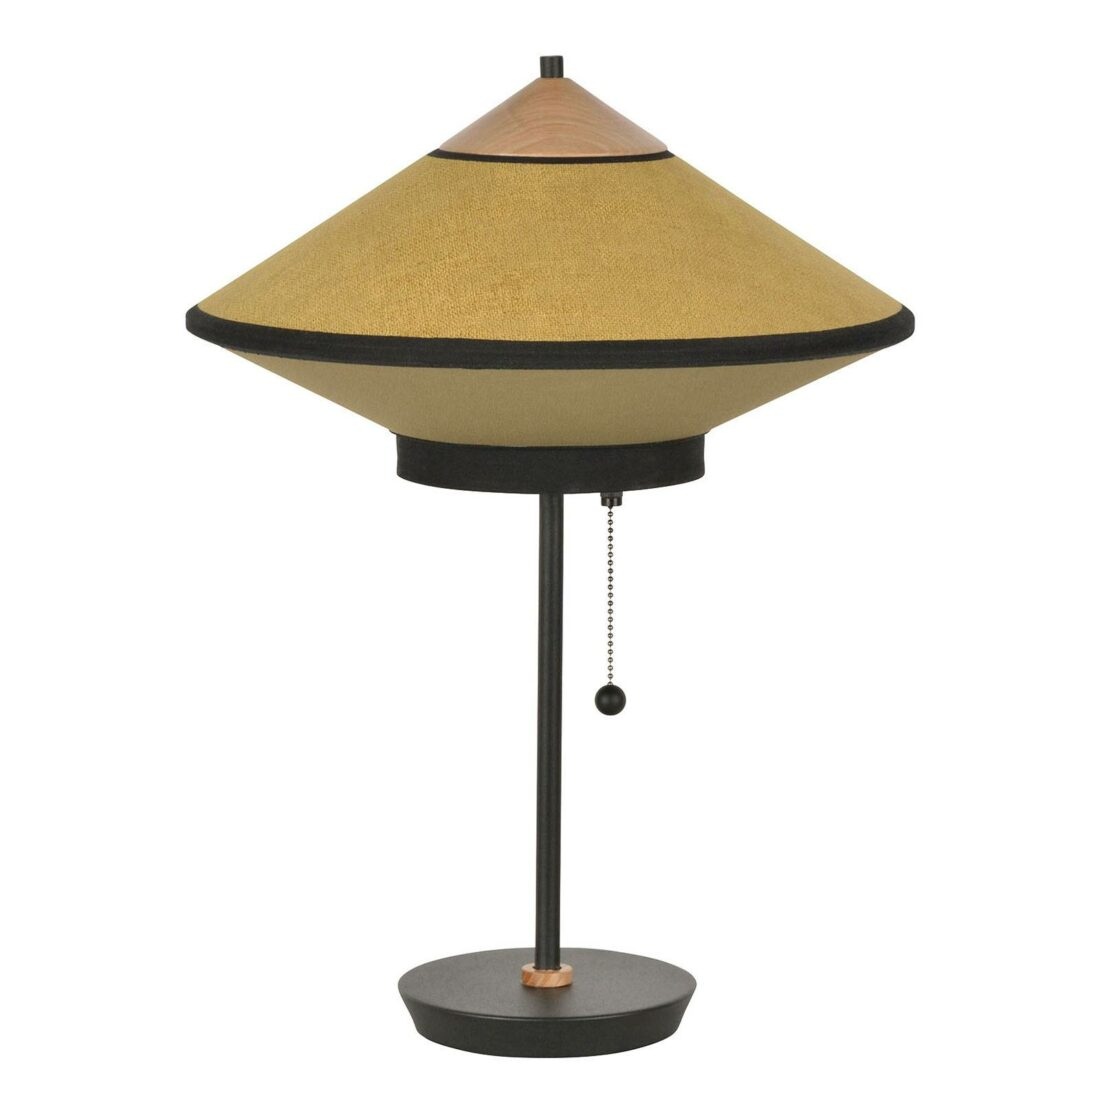 Forestier Cymbal S stolní lampa